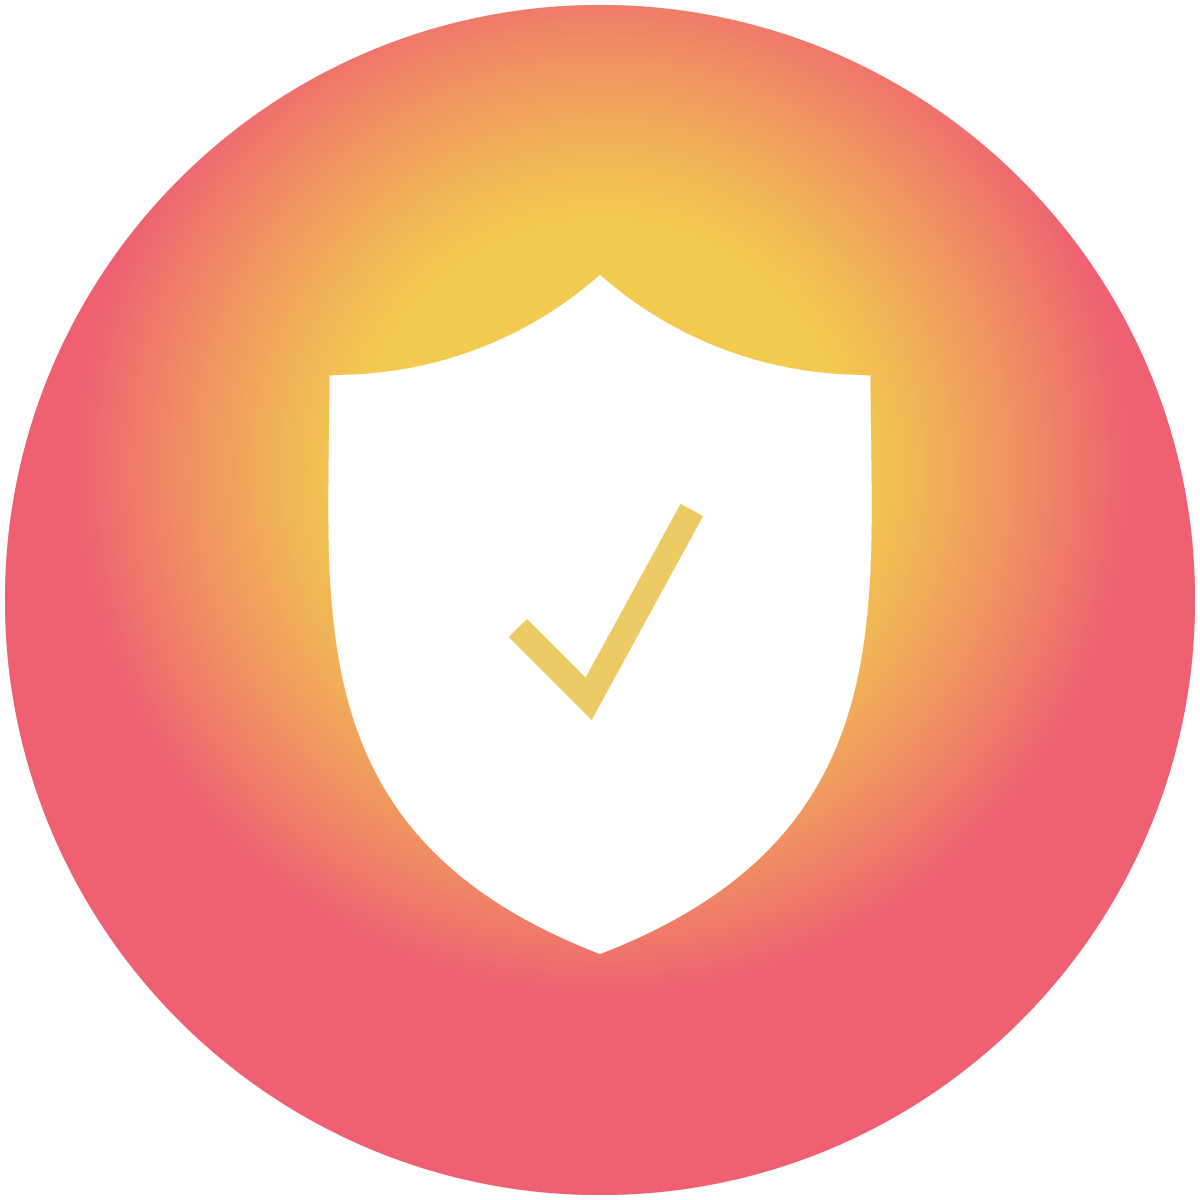 A check mark symbol on top of a shield, on top of a warm orange circle, signify that the chatbot offers trustworthy information.